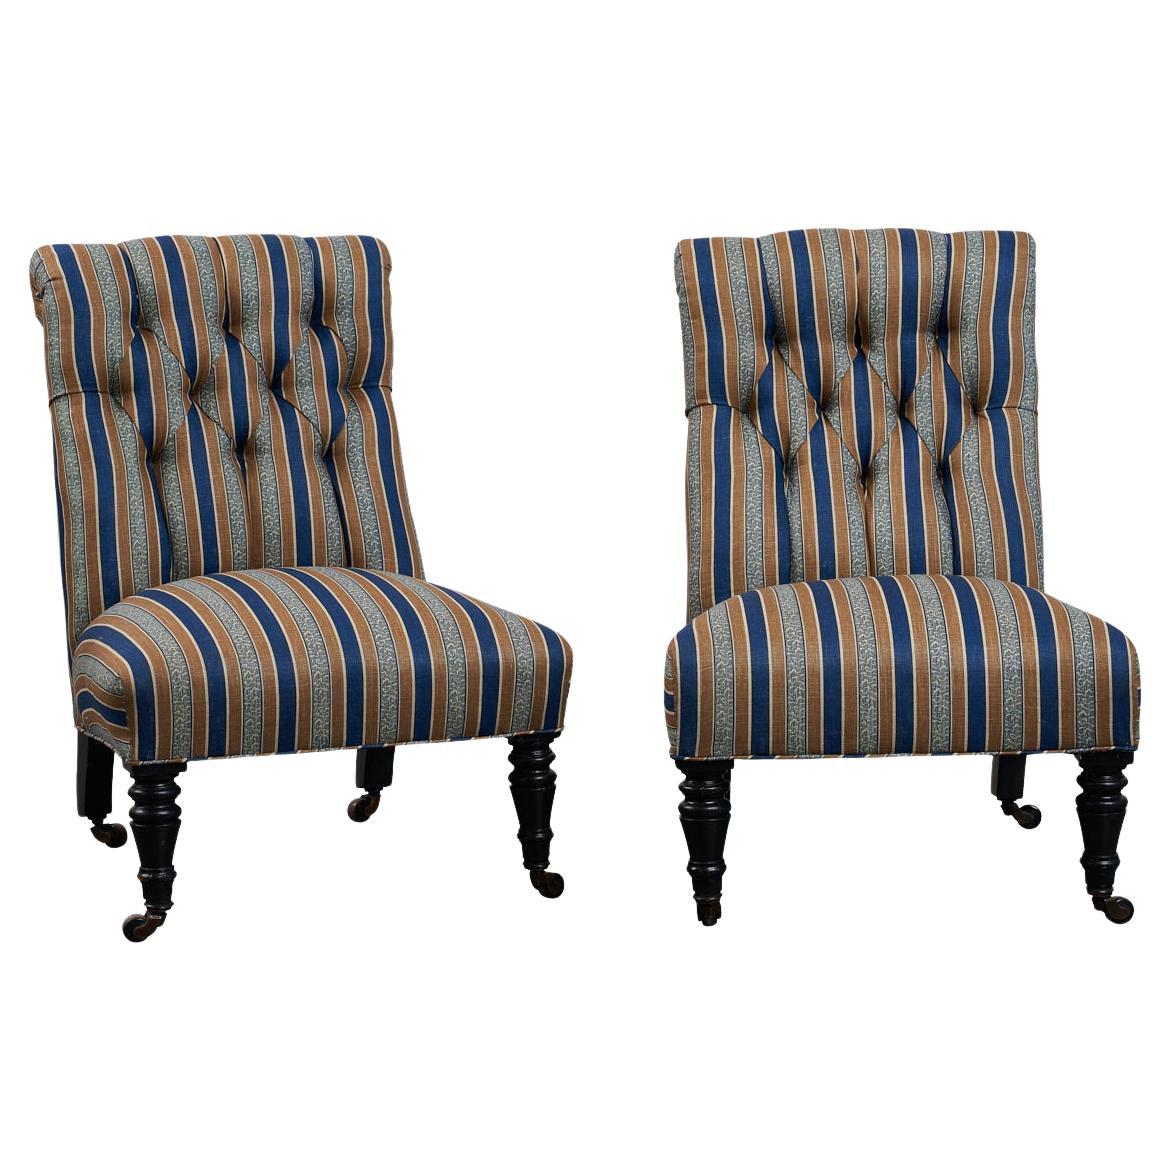 Pair of Napoleon III Slipper Chairs, 1830s, France, Reupholstered in Schumacher 